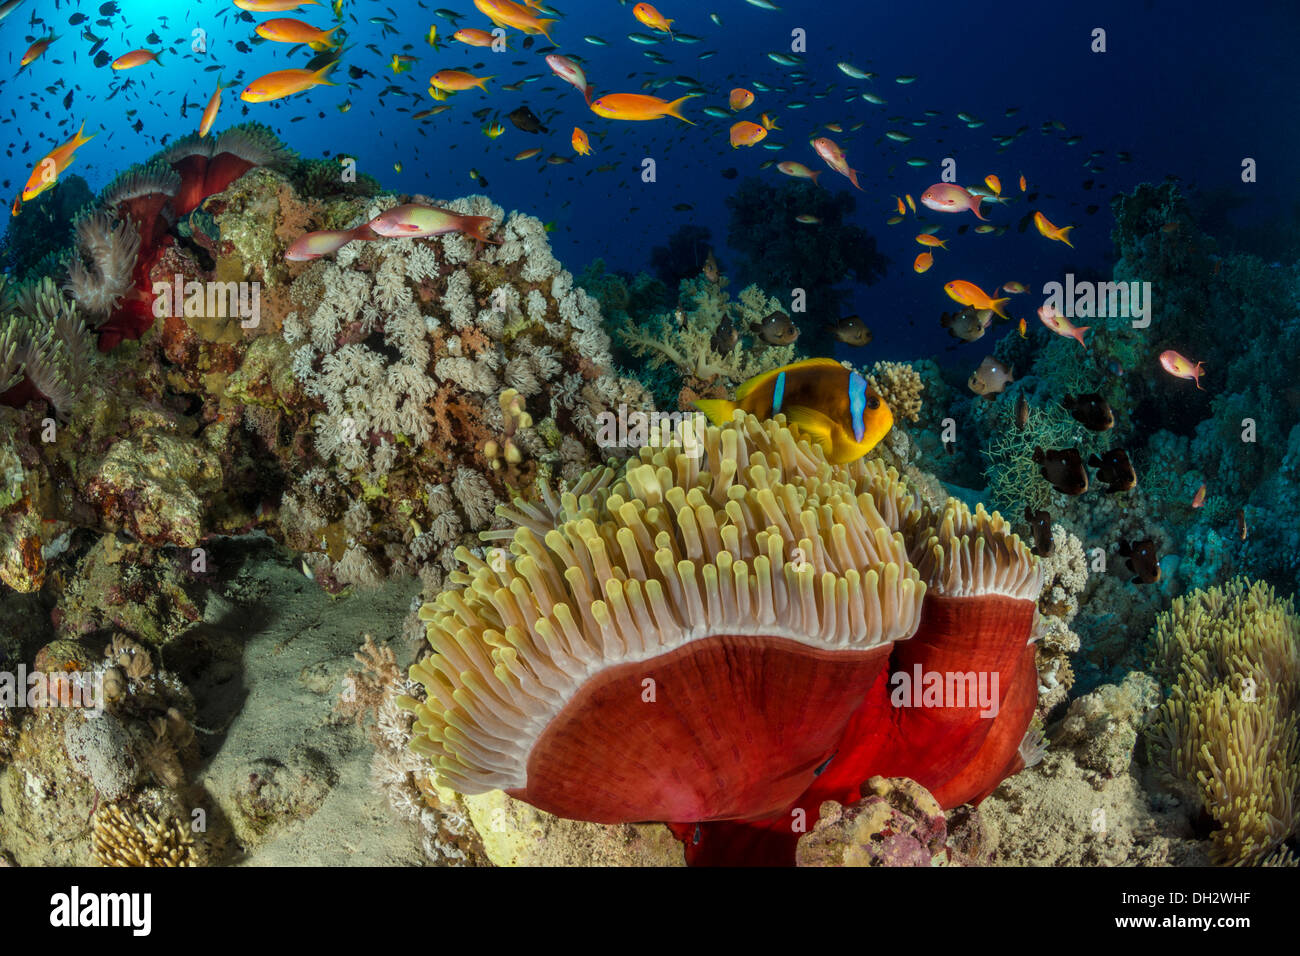 Red Sea Anemonefish in Magnificent Anemone, Amphiprion bicinctus, Ras Muhammad, Red Sea, Sinai, Egypt Stock Photo